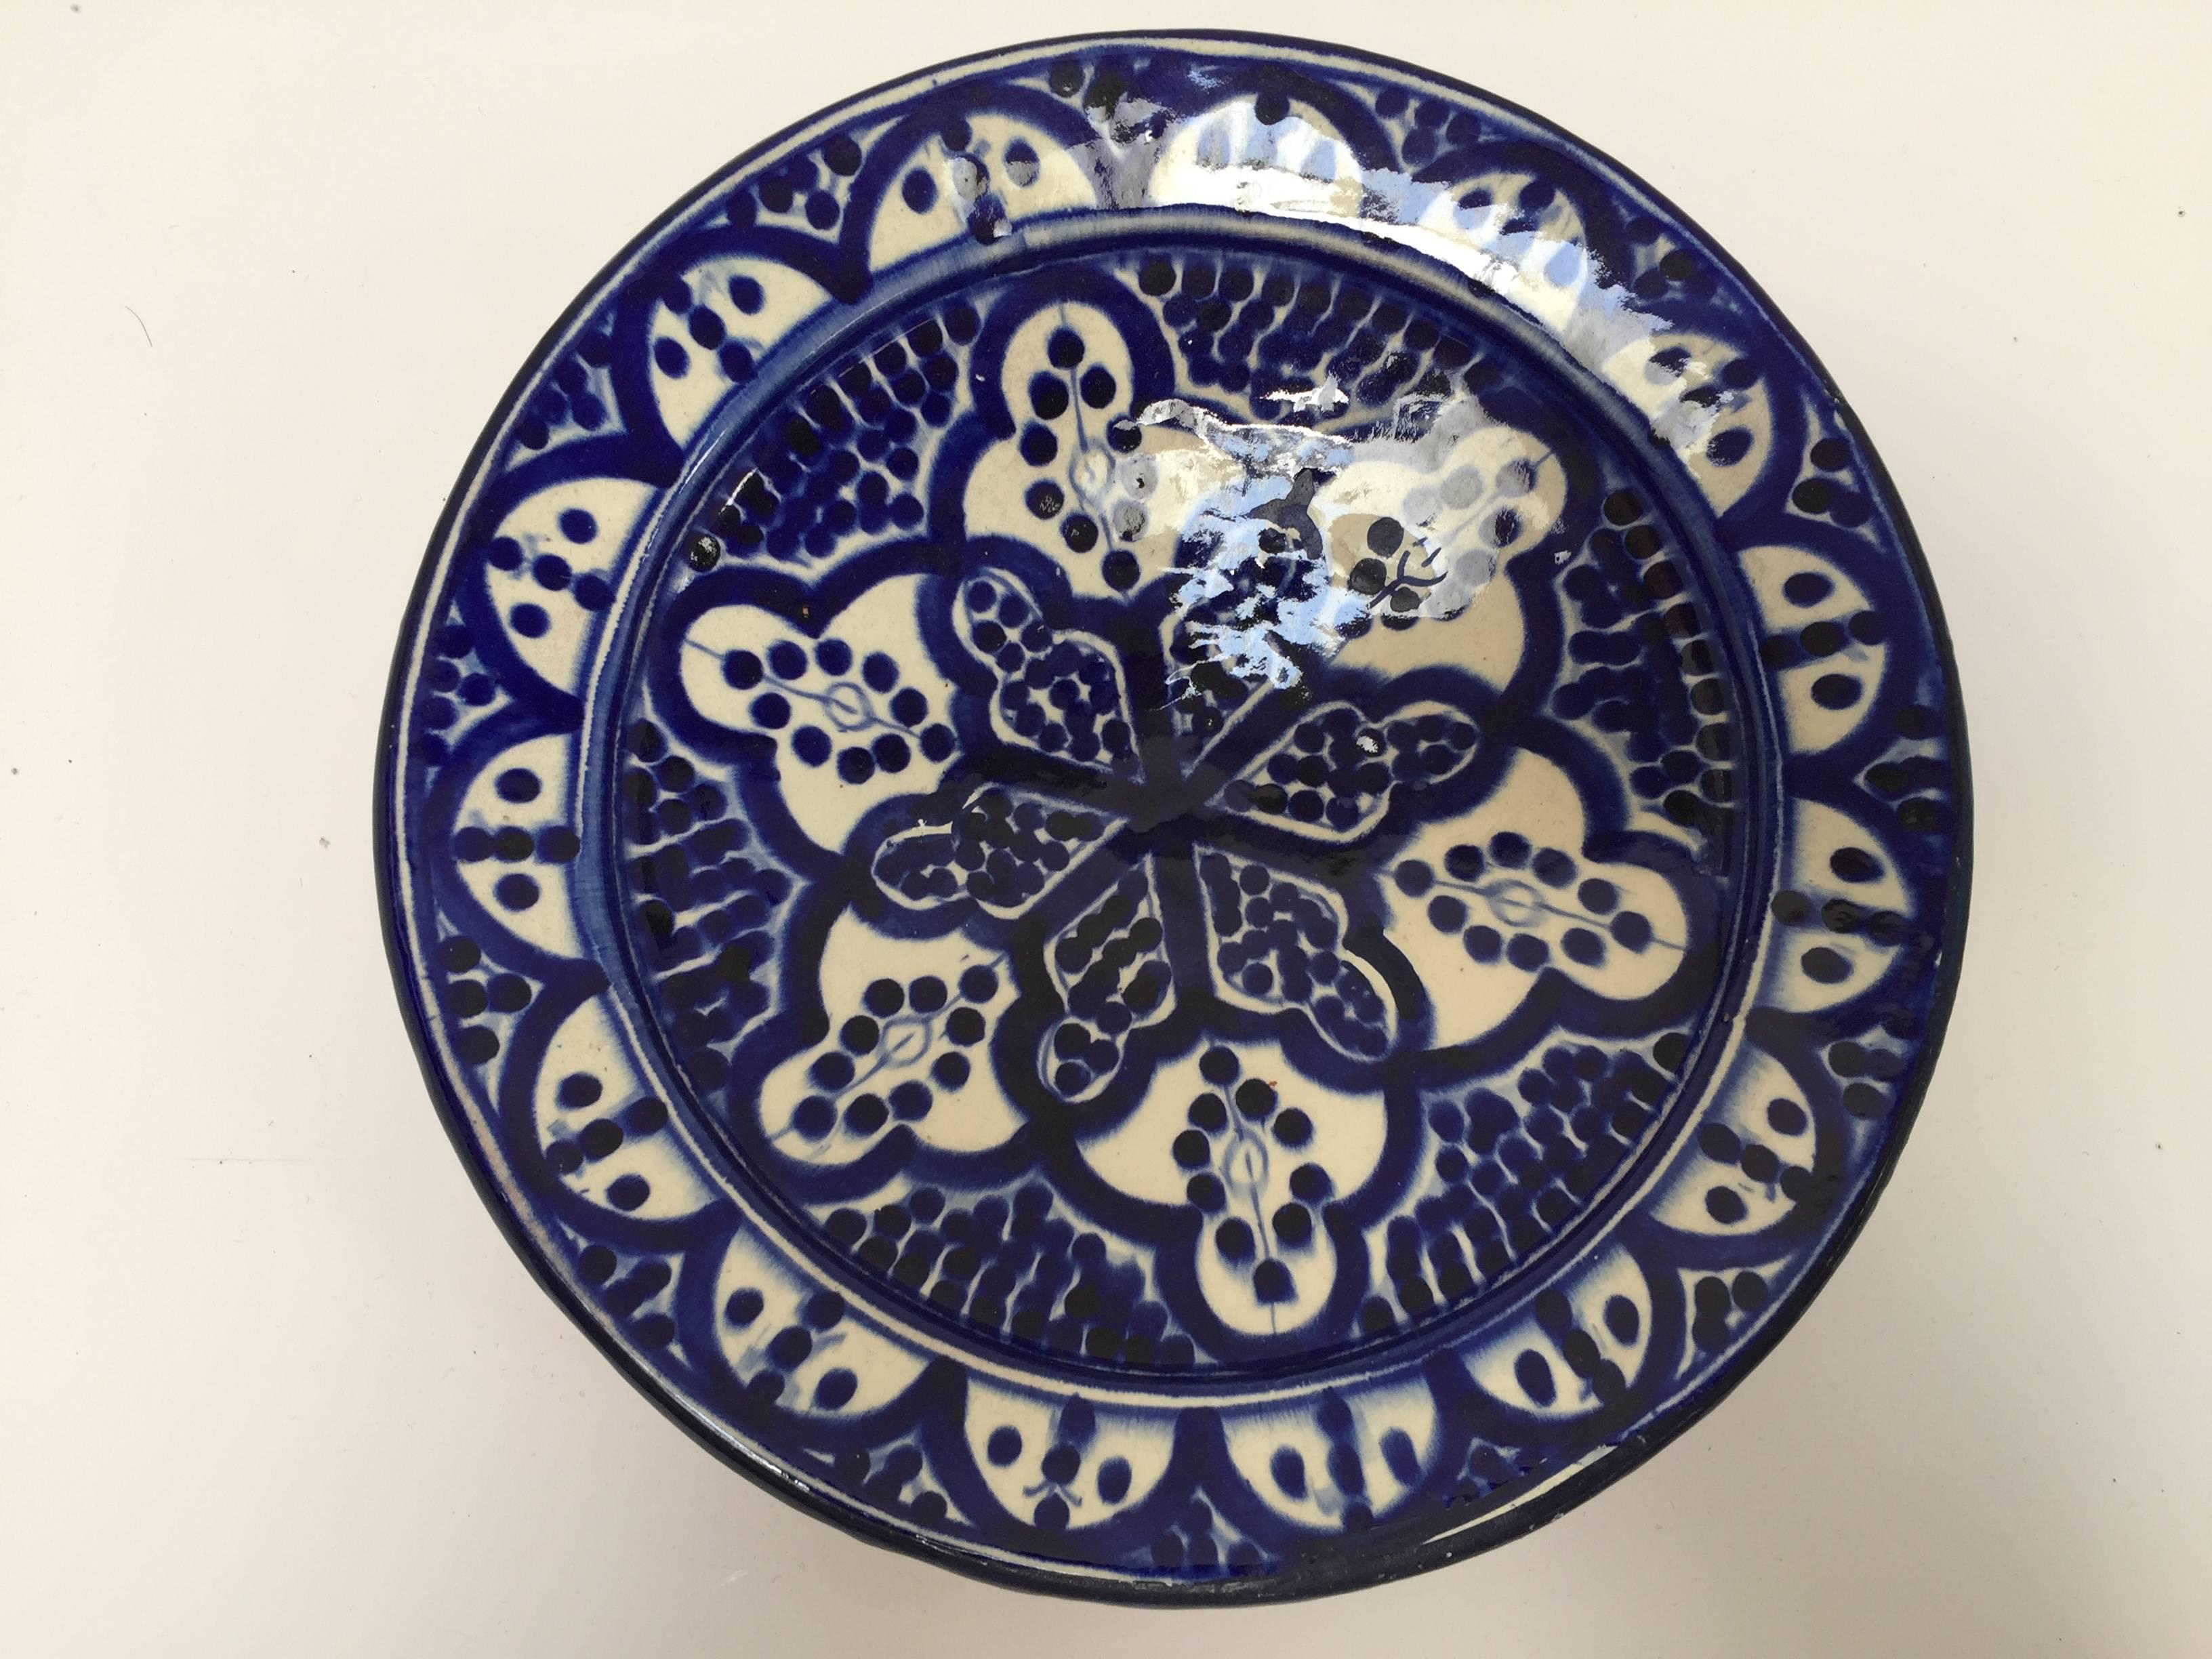 Moroccan handcrafted ceramic plate hand-painted in blue and white floral Moorish designs from Safi Morocco.
Could be hanging on the wall or used to display fruits.
Size: 10